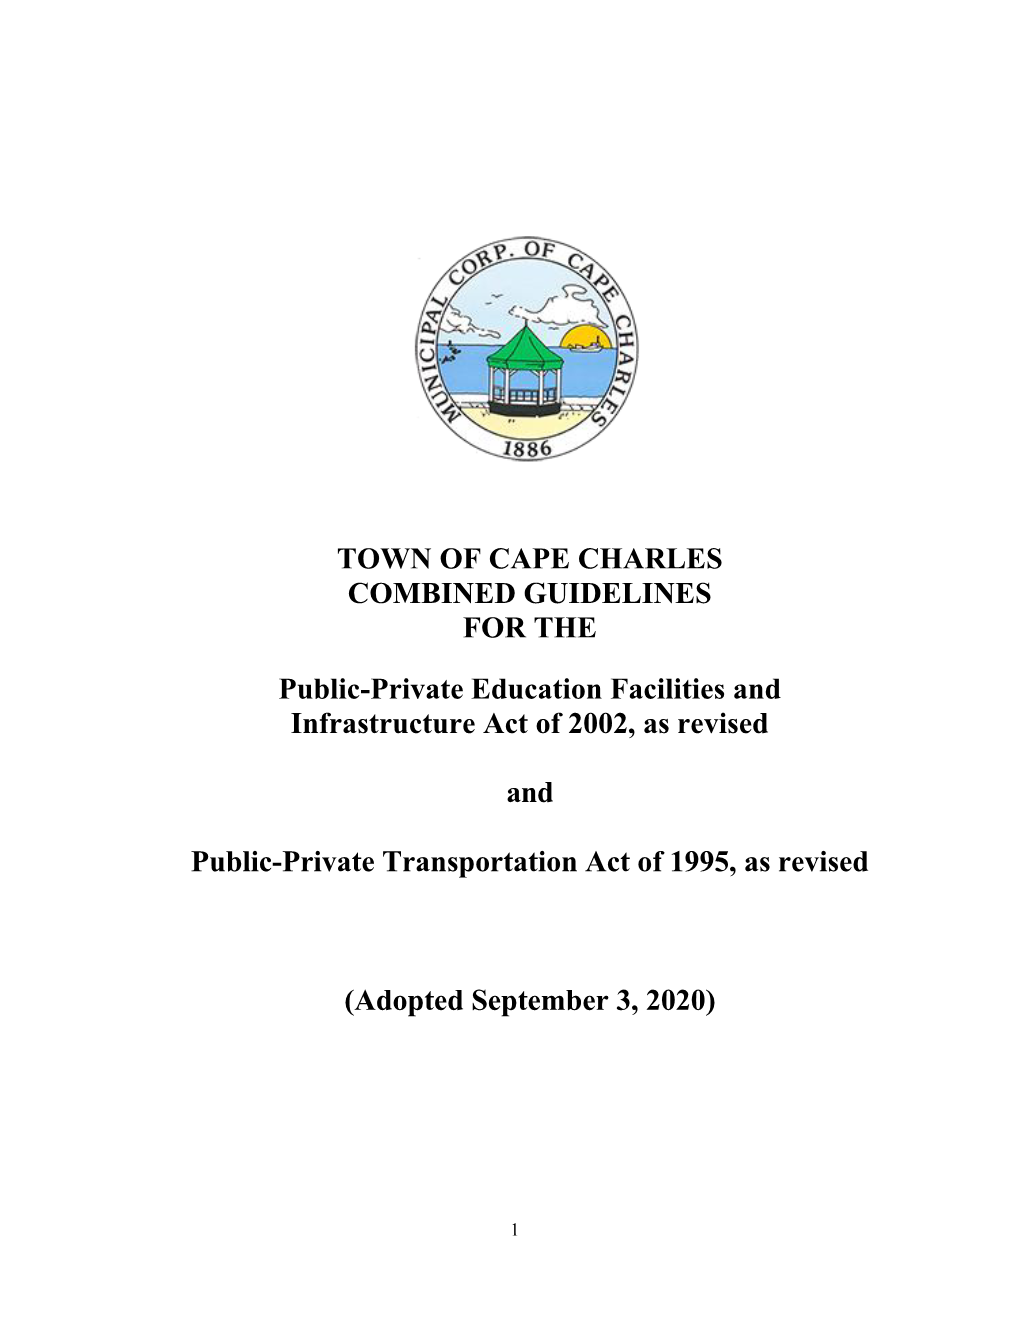 Town of Cape Charles Combined Guidelines for The